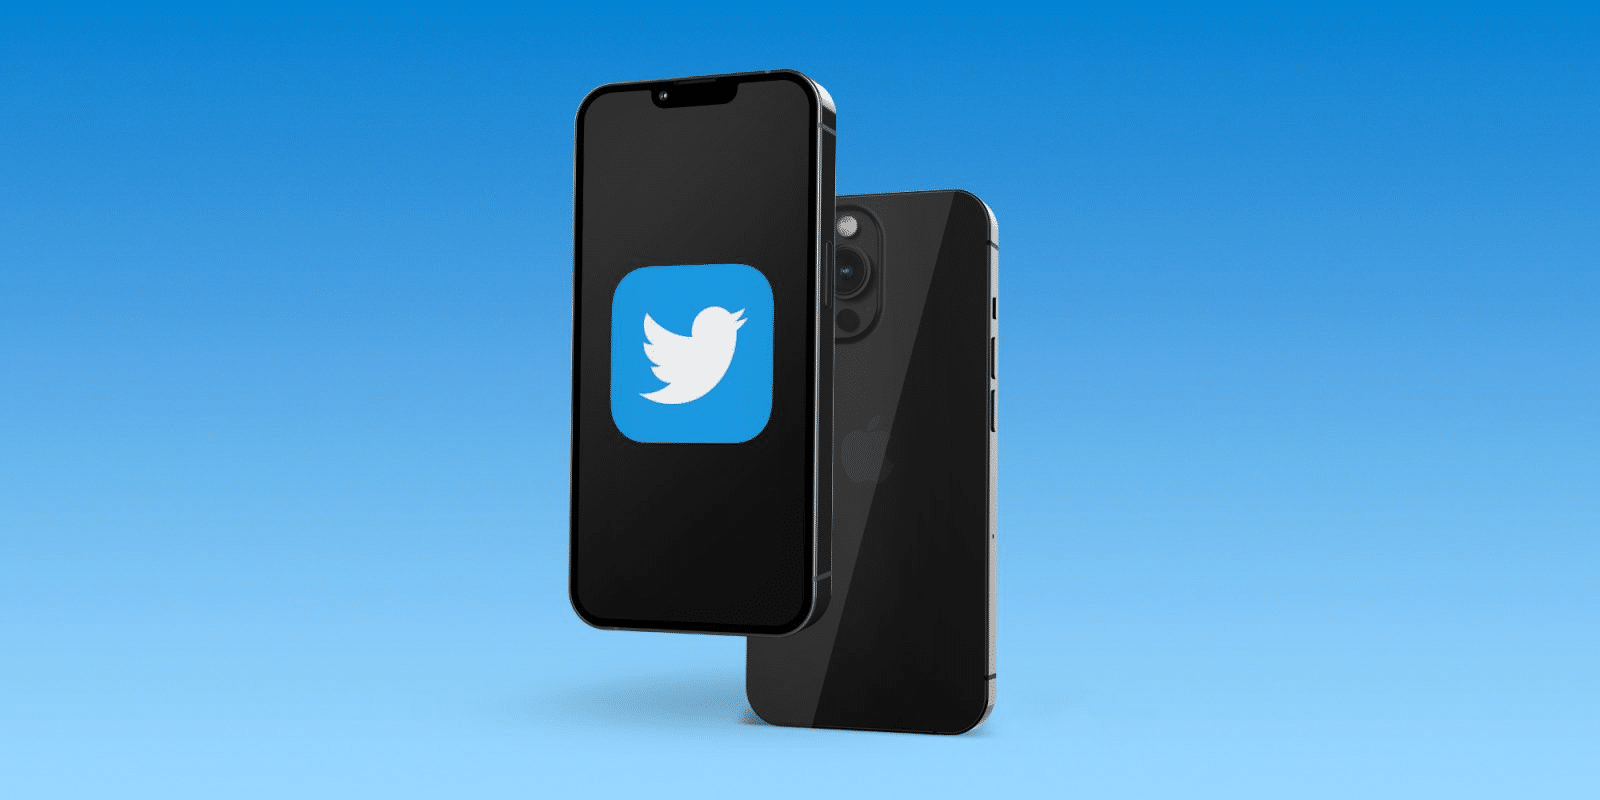 Twitter Teases Upcoming Video Features, Aiming to Strengthen its Position as a Video Platform